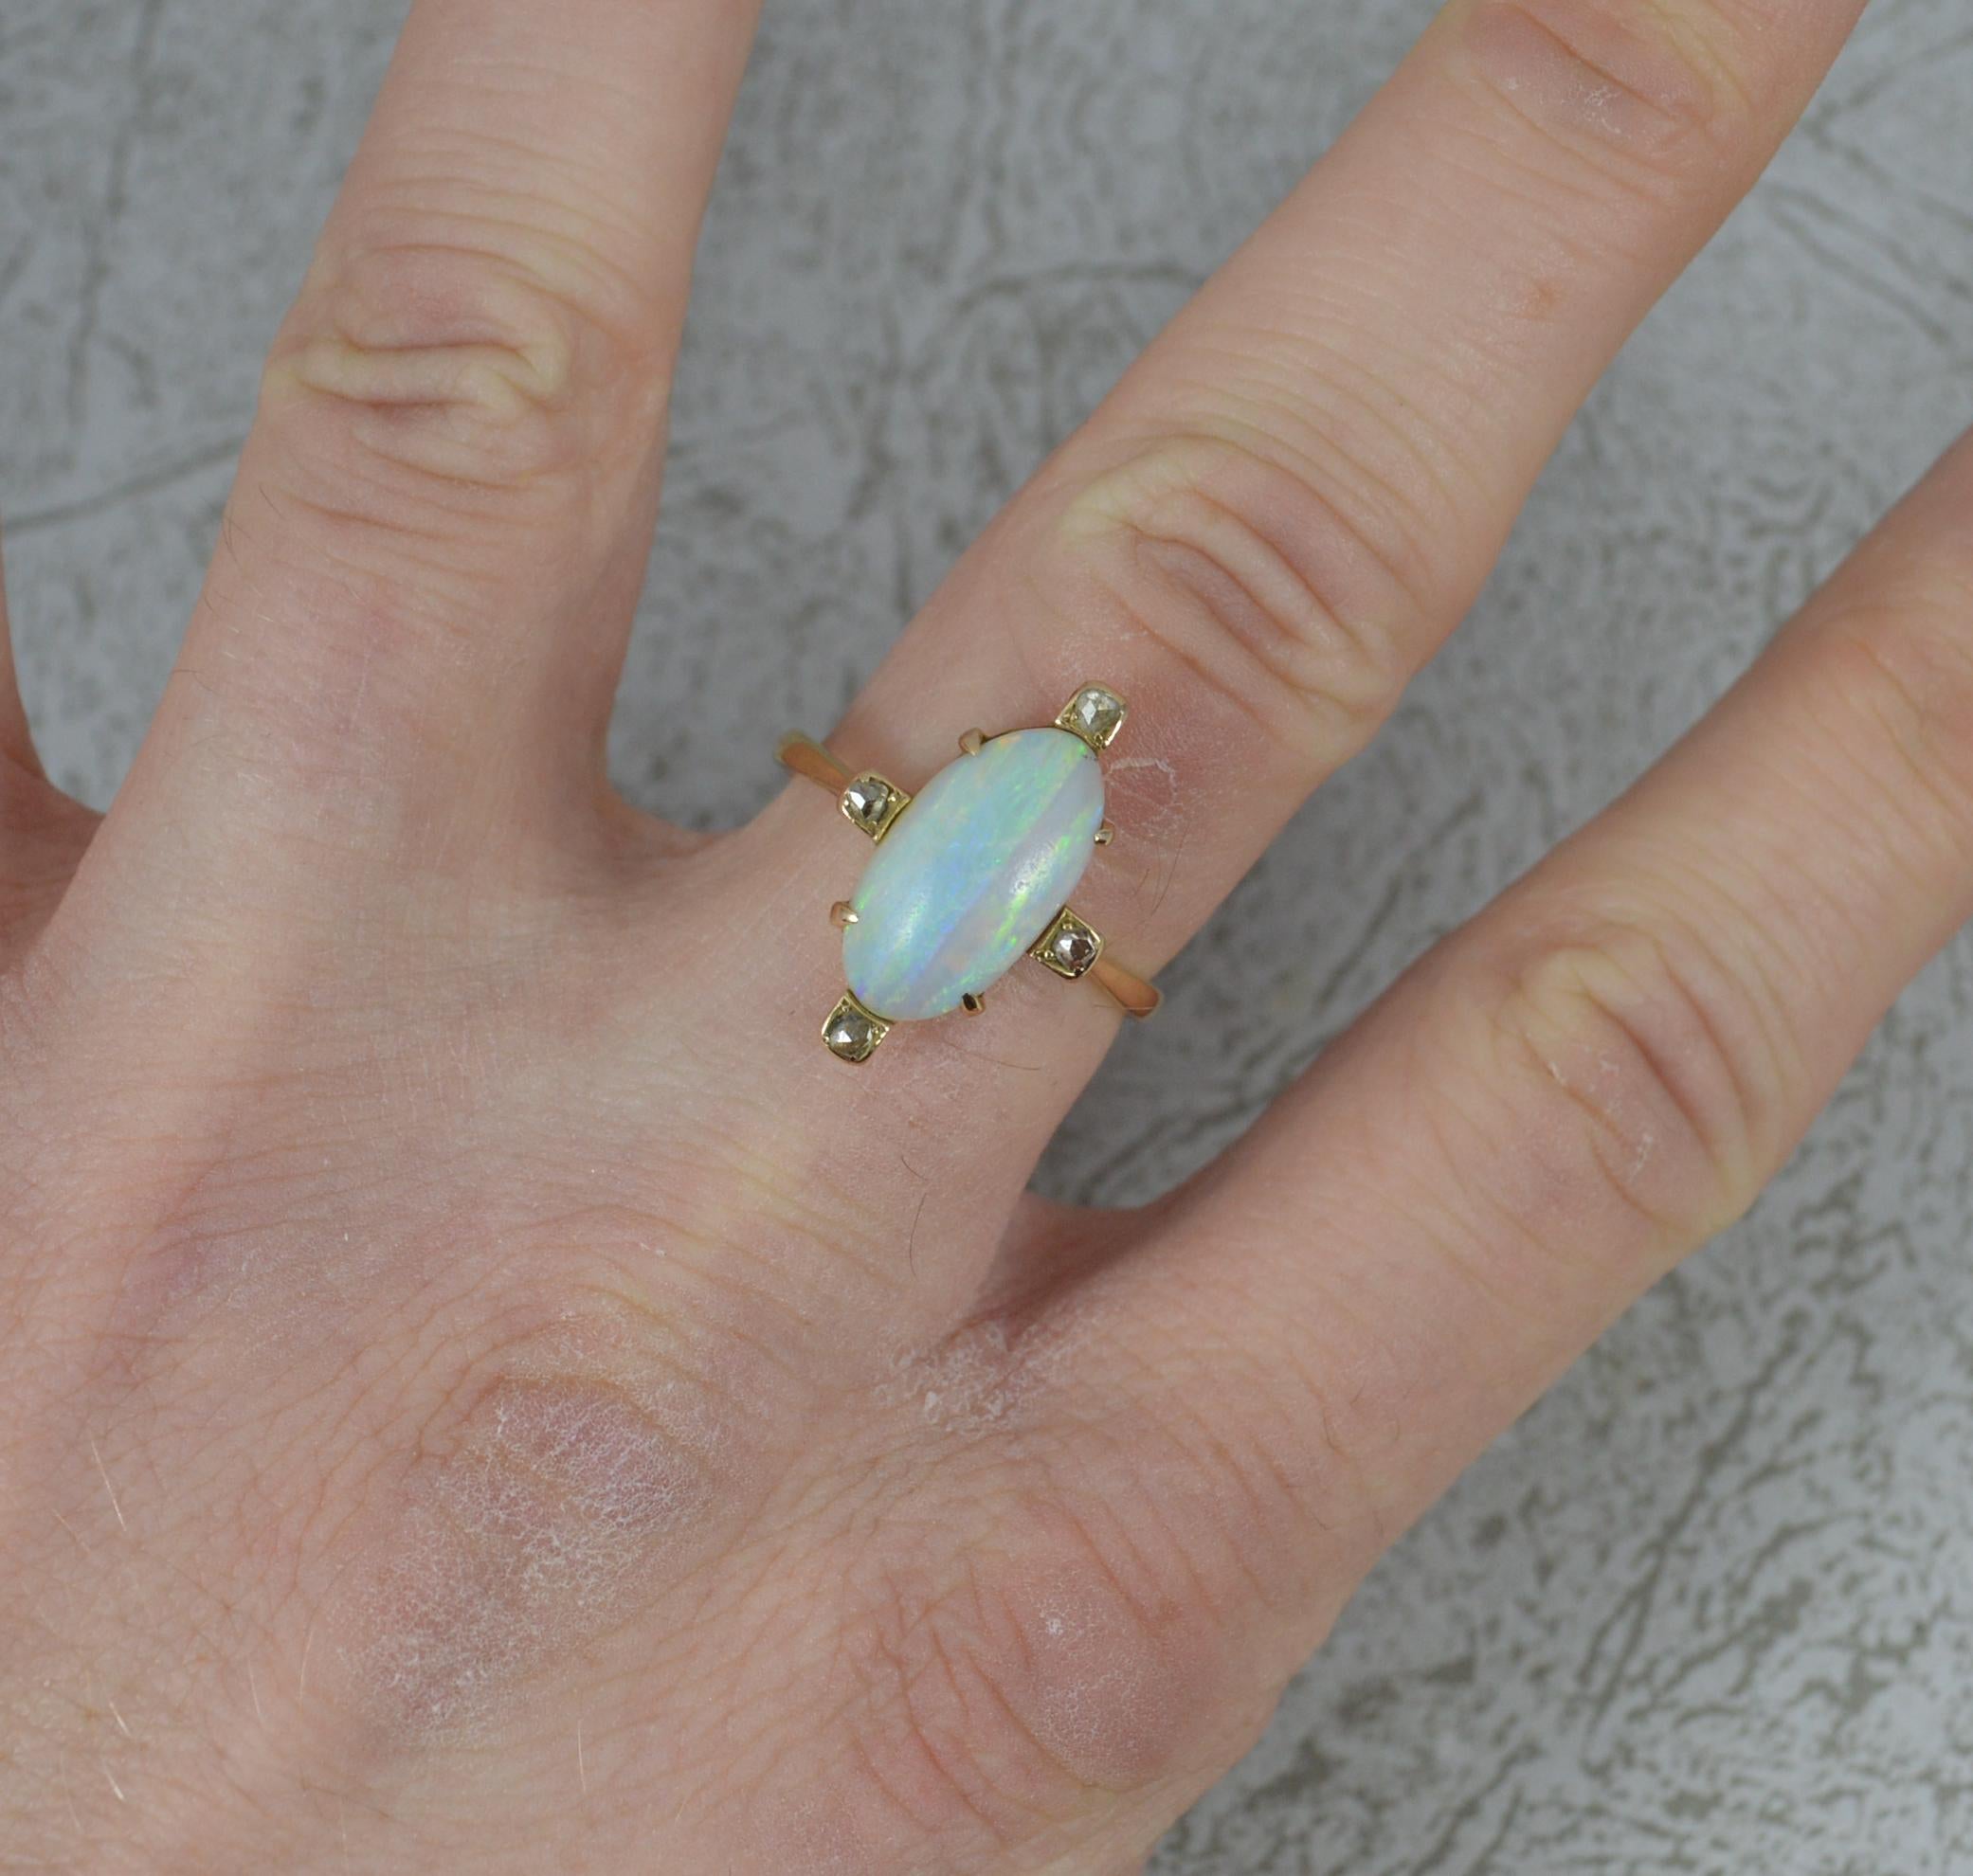 A fine opal and diamond ring, circa 1880.
Solid 18 carat yellow gold example.
Set with one oval shaped opal in four claw setting. 8mm x 14mm approx.
Surrounding are four rose cut diamonds in four square heads. 12.8mm x 19.2mm. Protruding 6.4mm off